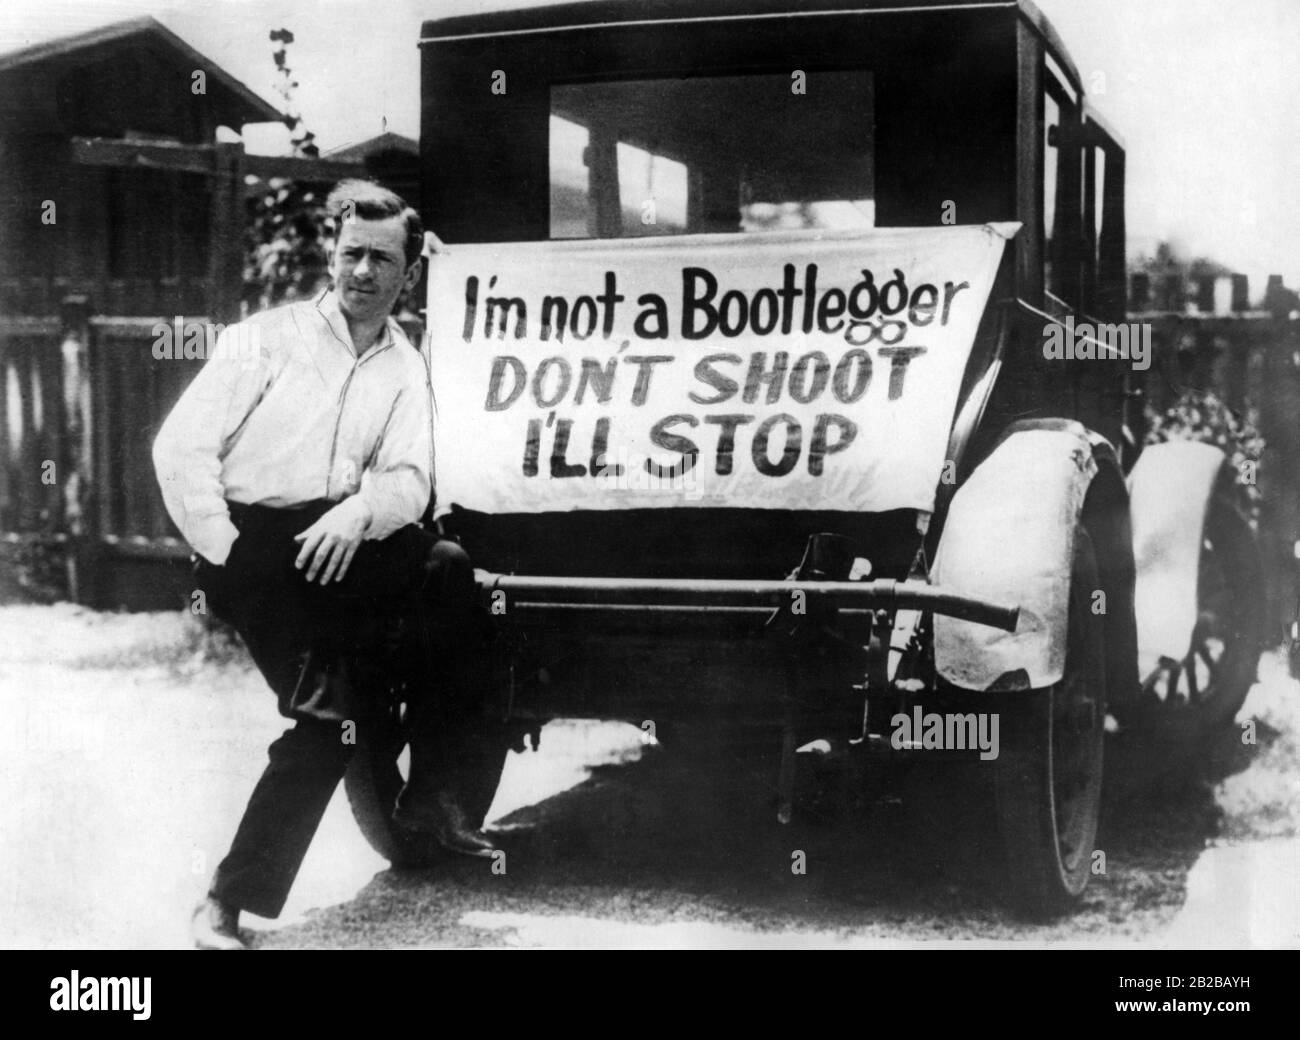 For fear of police, a carpenter from Los Angeles attached a sign on his car that says: 'Do not shoot, I'm not a bootlegger, I'll stop'. Stock Photo